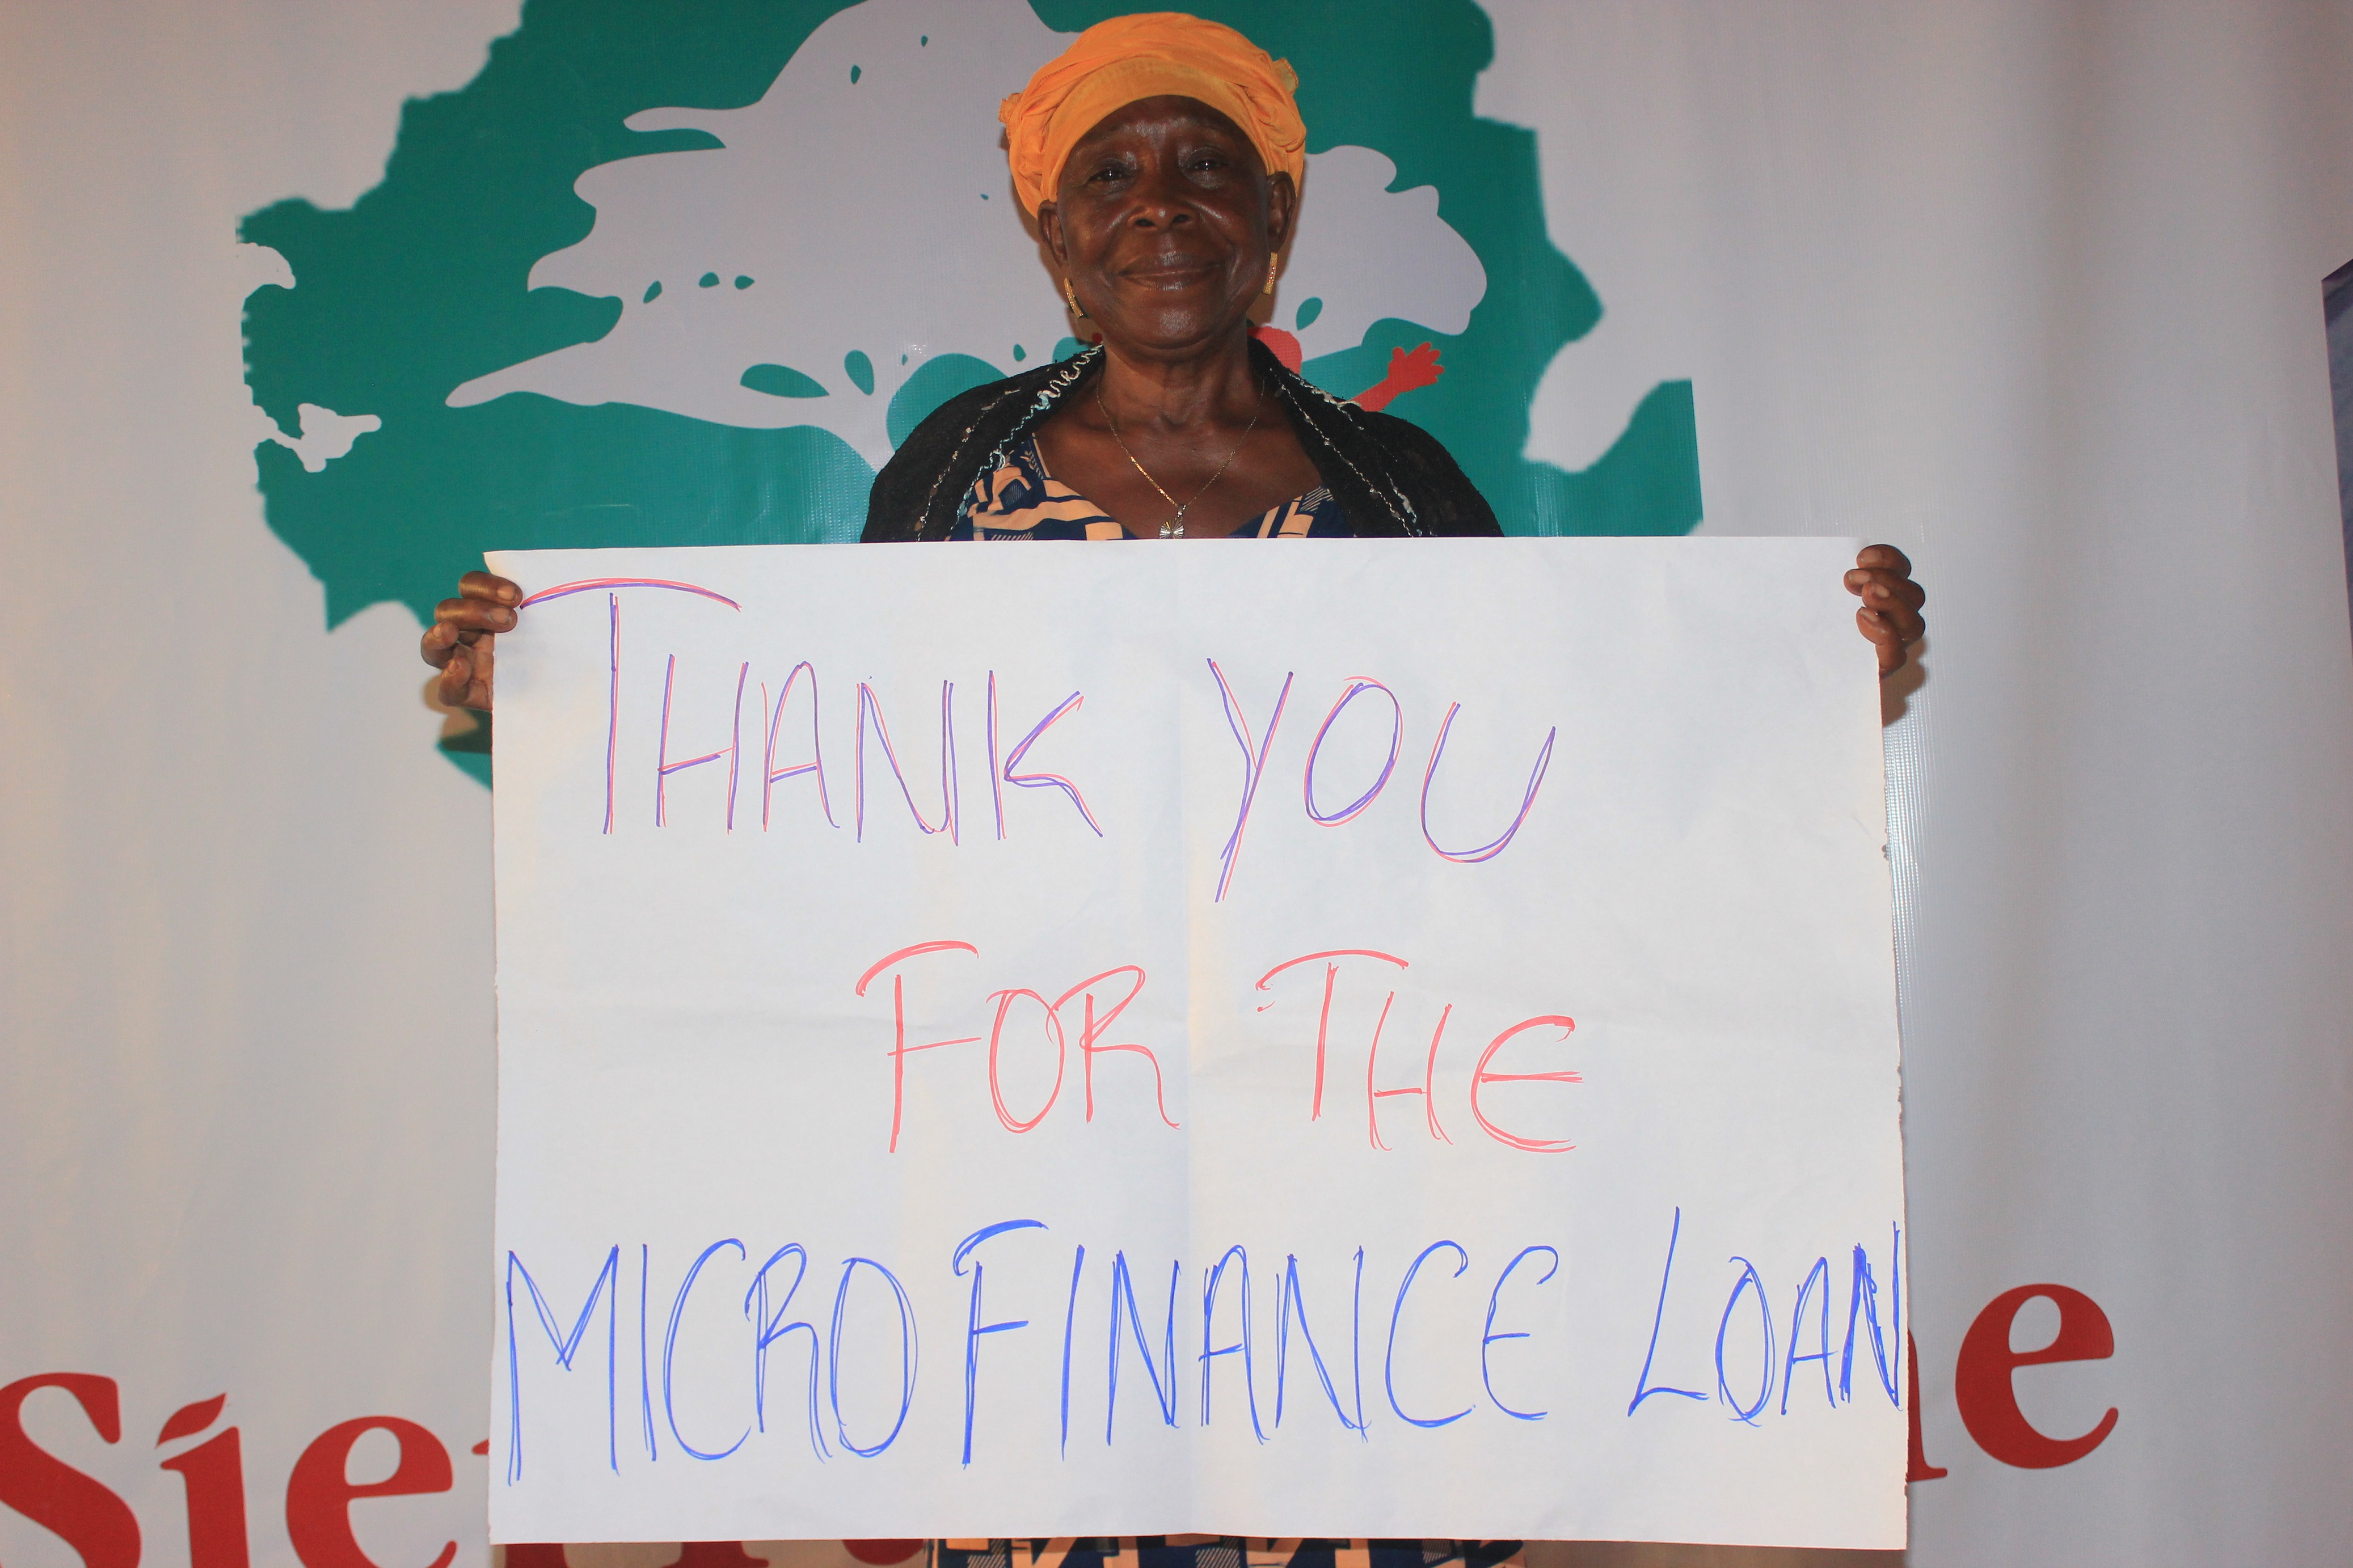 Microfinance thanks from Mabinty 